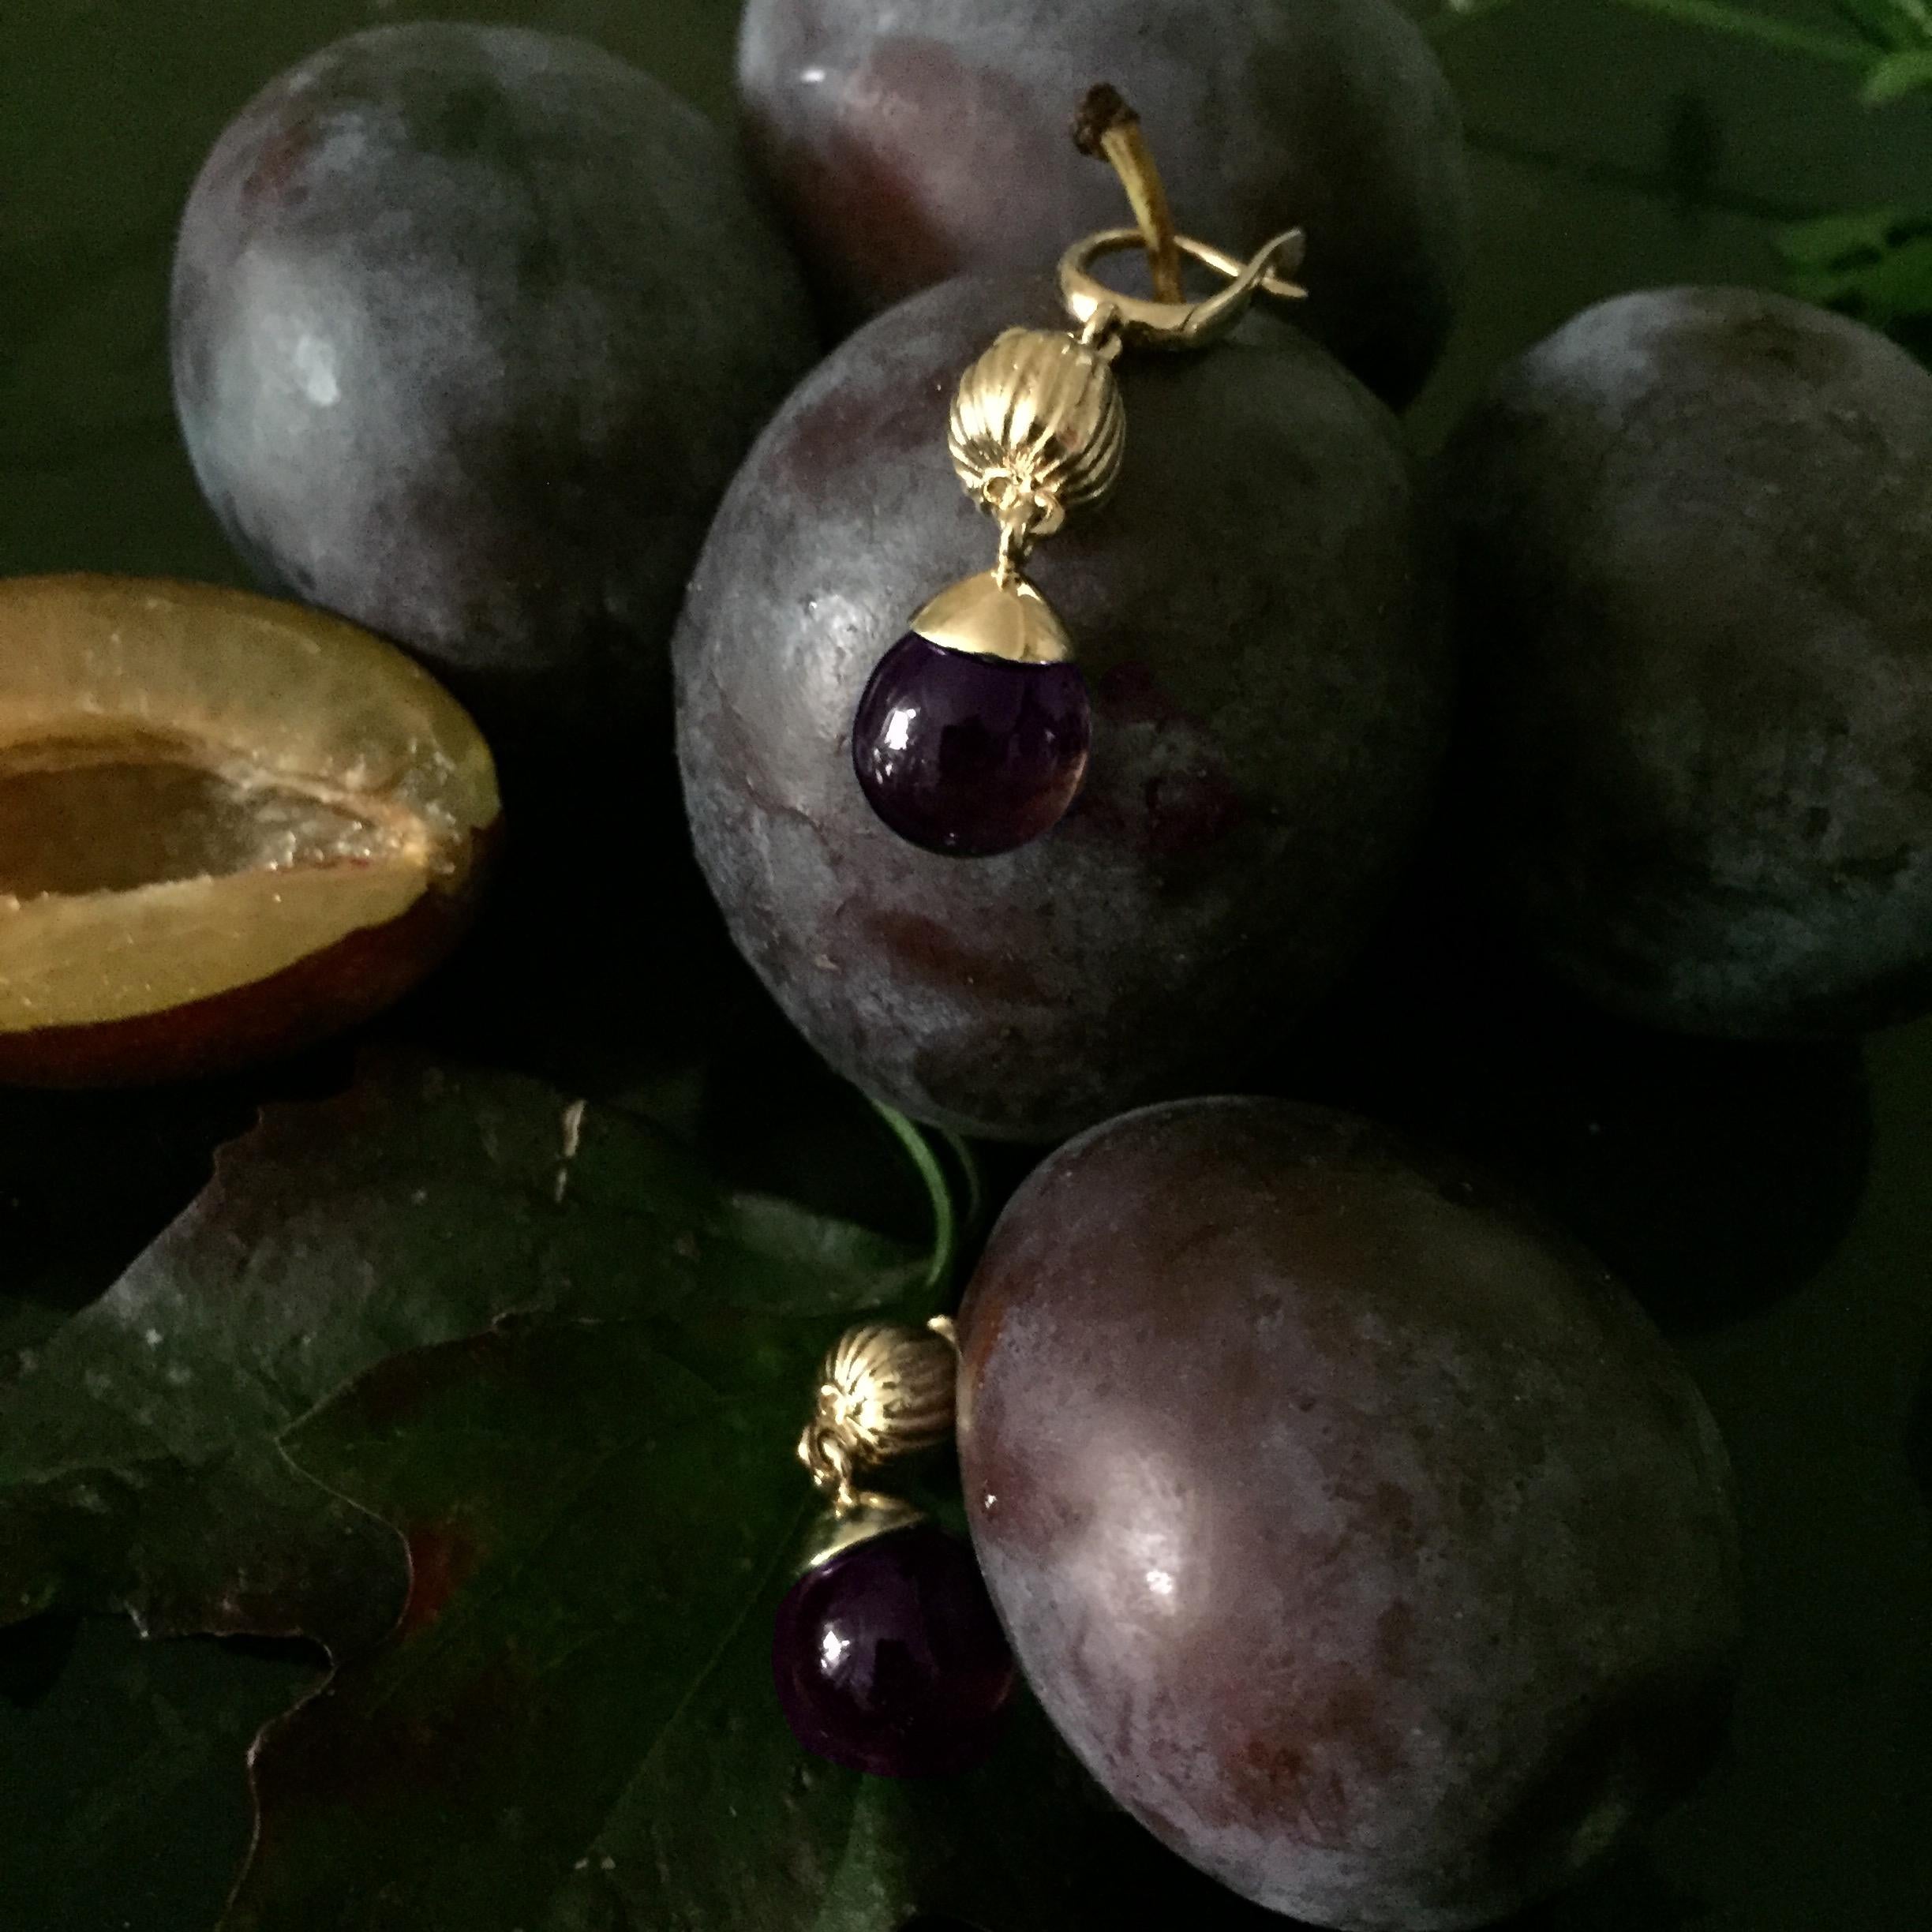 These contemporary earrings showcase detachable cabochon amethyst drops that allow light to pass through. Crafted from 14 karat yellow gold, the earrings were designed by the artist and have been reviewed in Vogue UA.

The design of the earrings